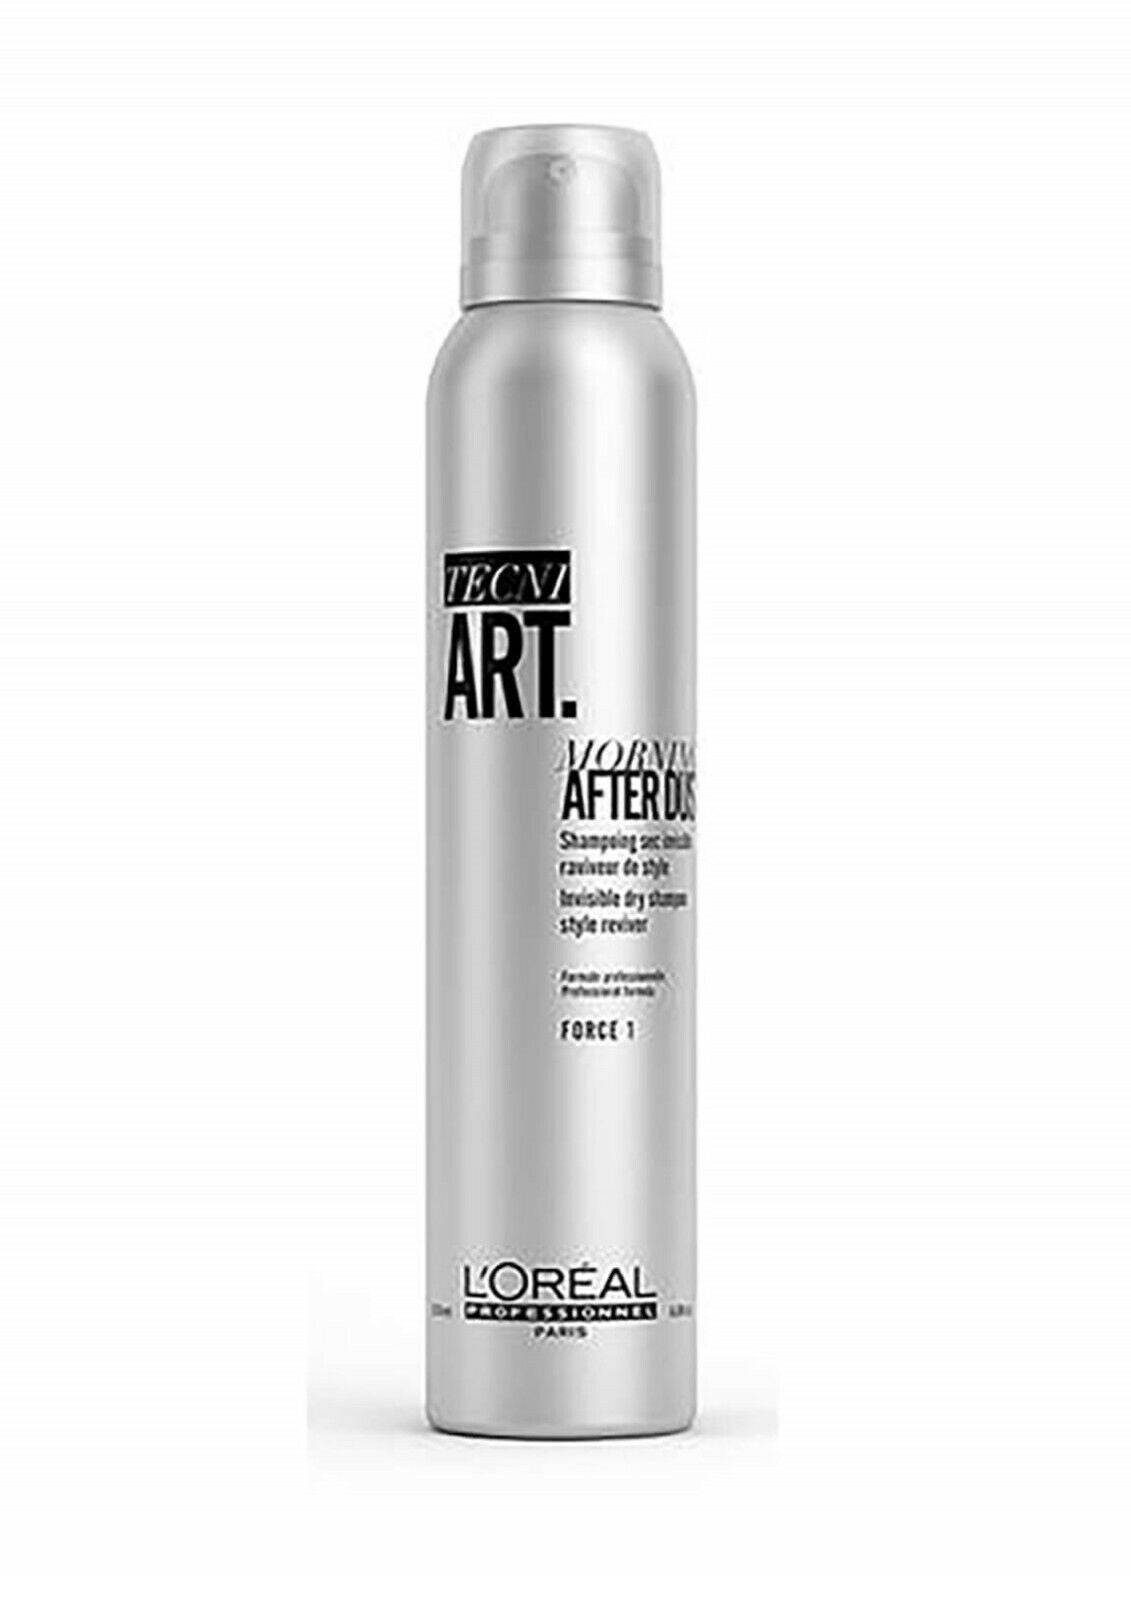 Loreal Tecni Art Morning After Dust  Dry Shampoo 200ml - On Line Hair Depot